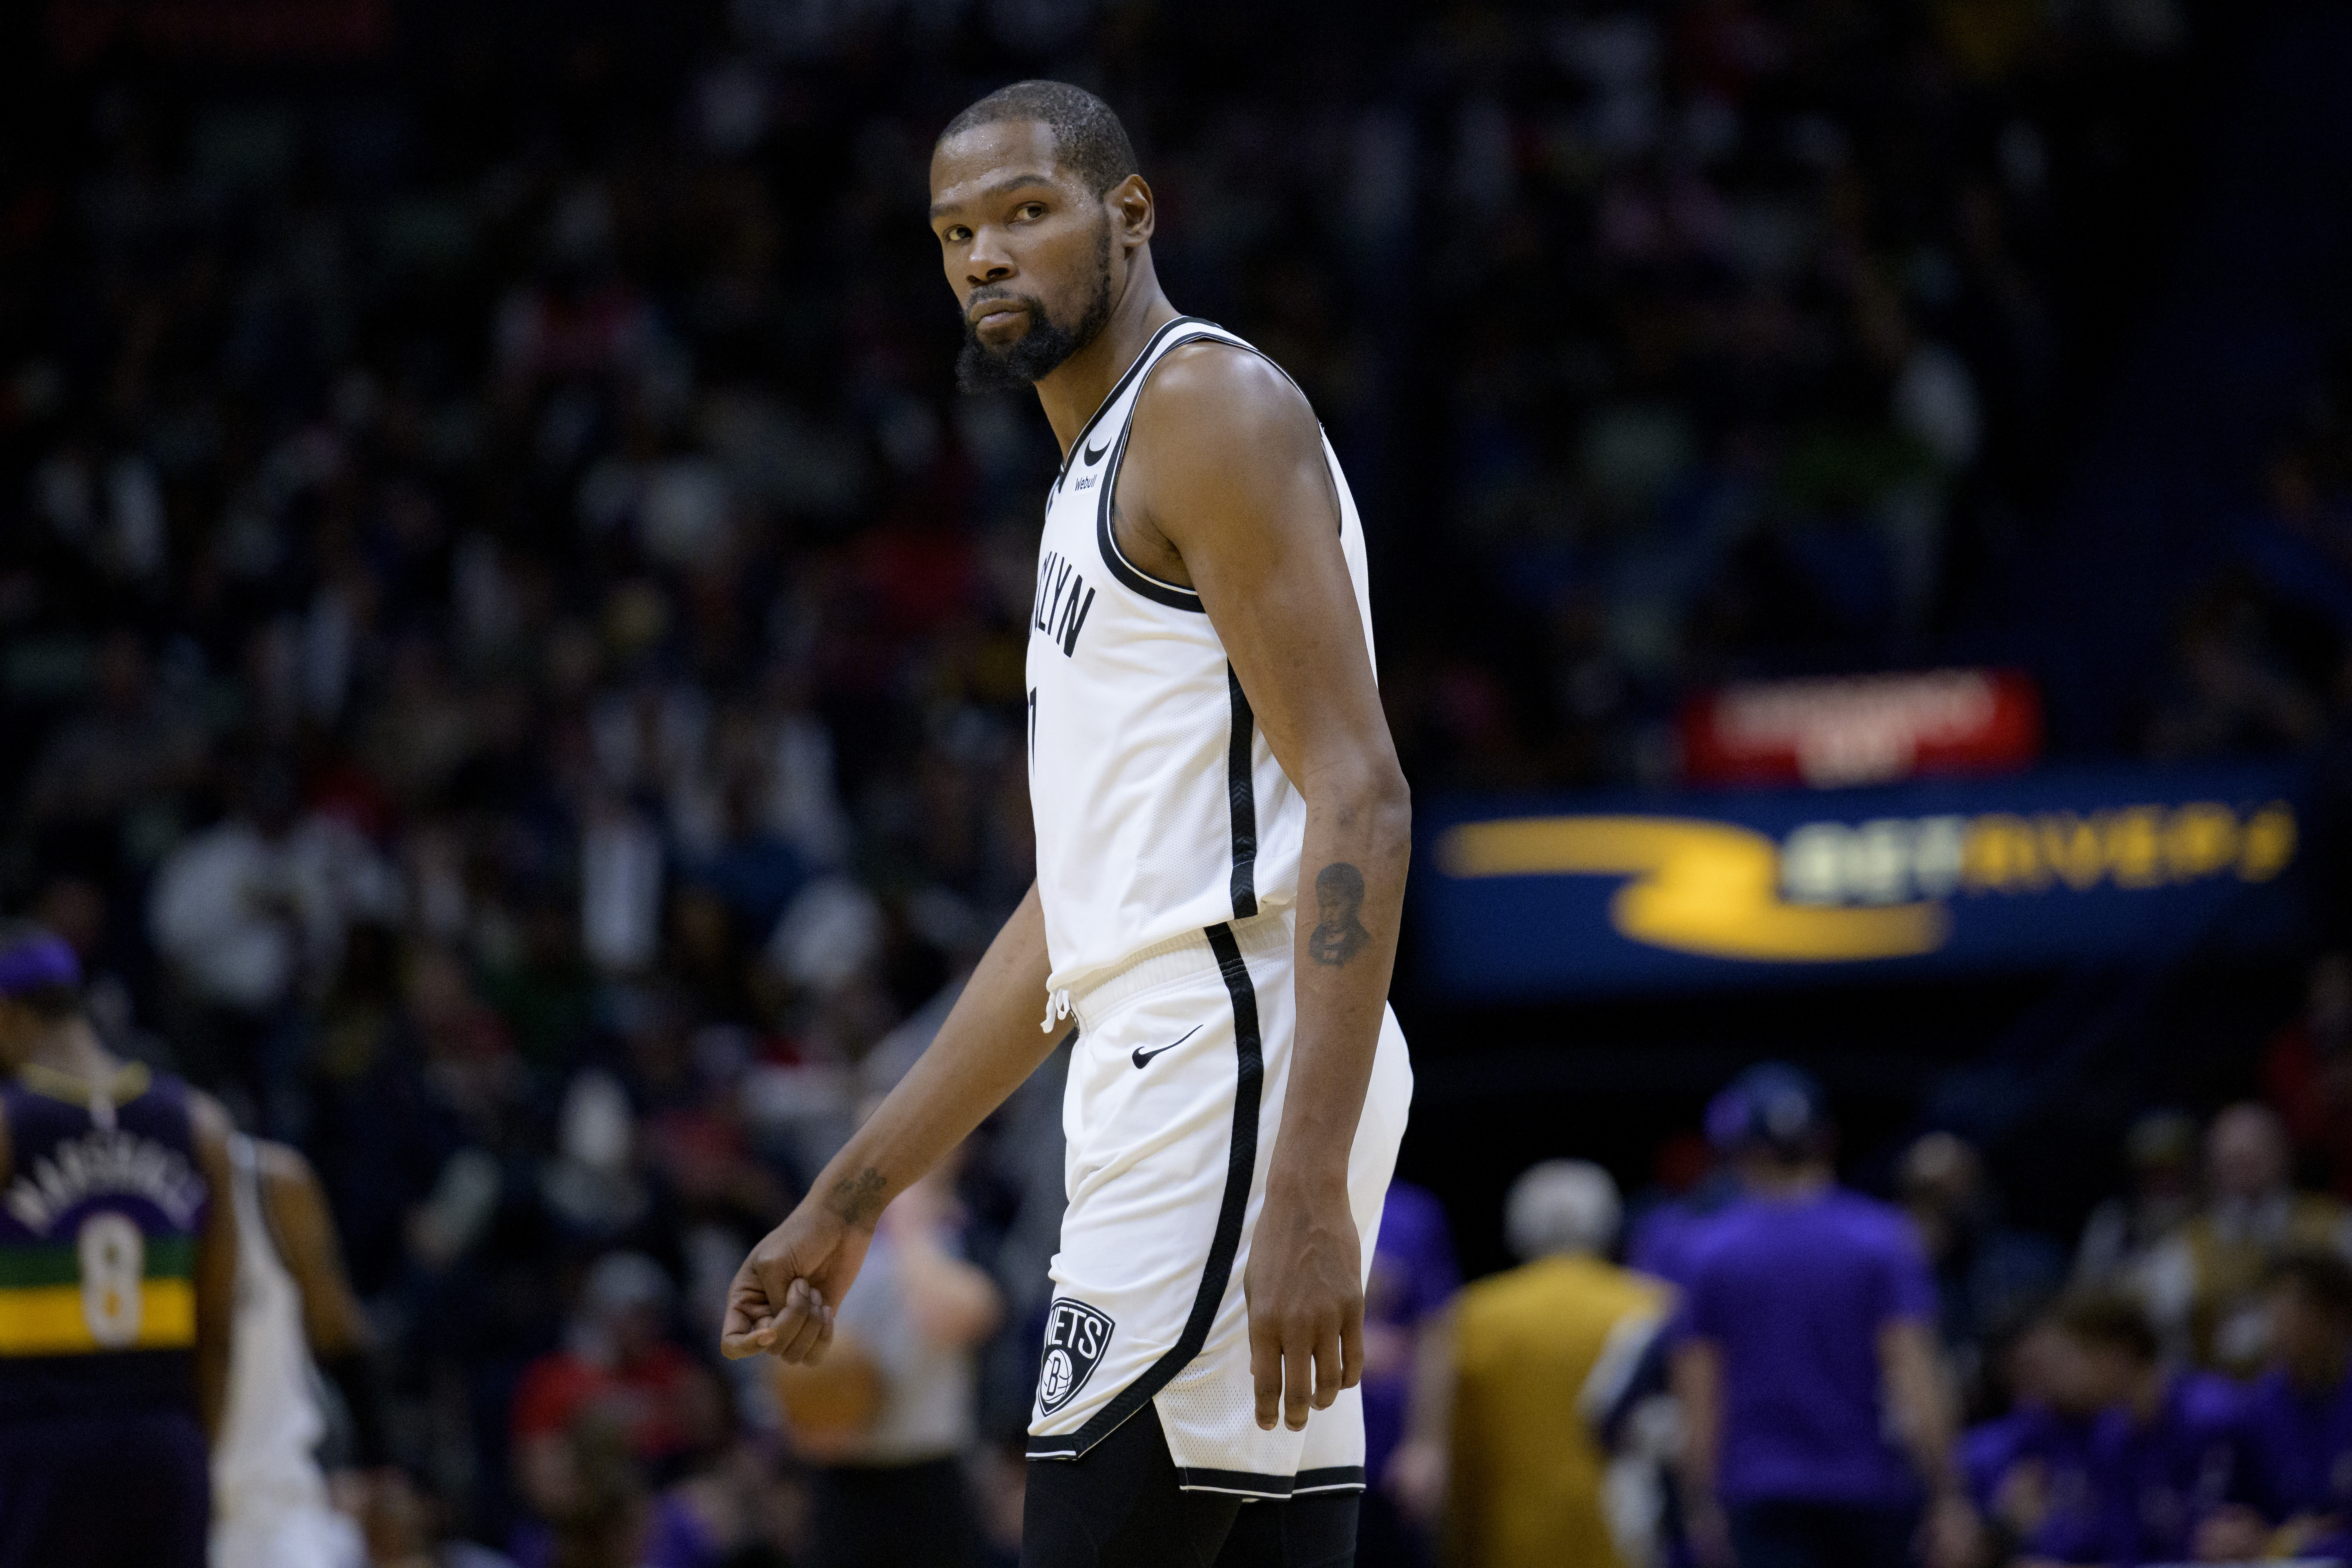 Kevin Durant trade gave big boost to Suns jersey sales